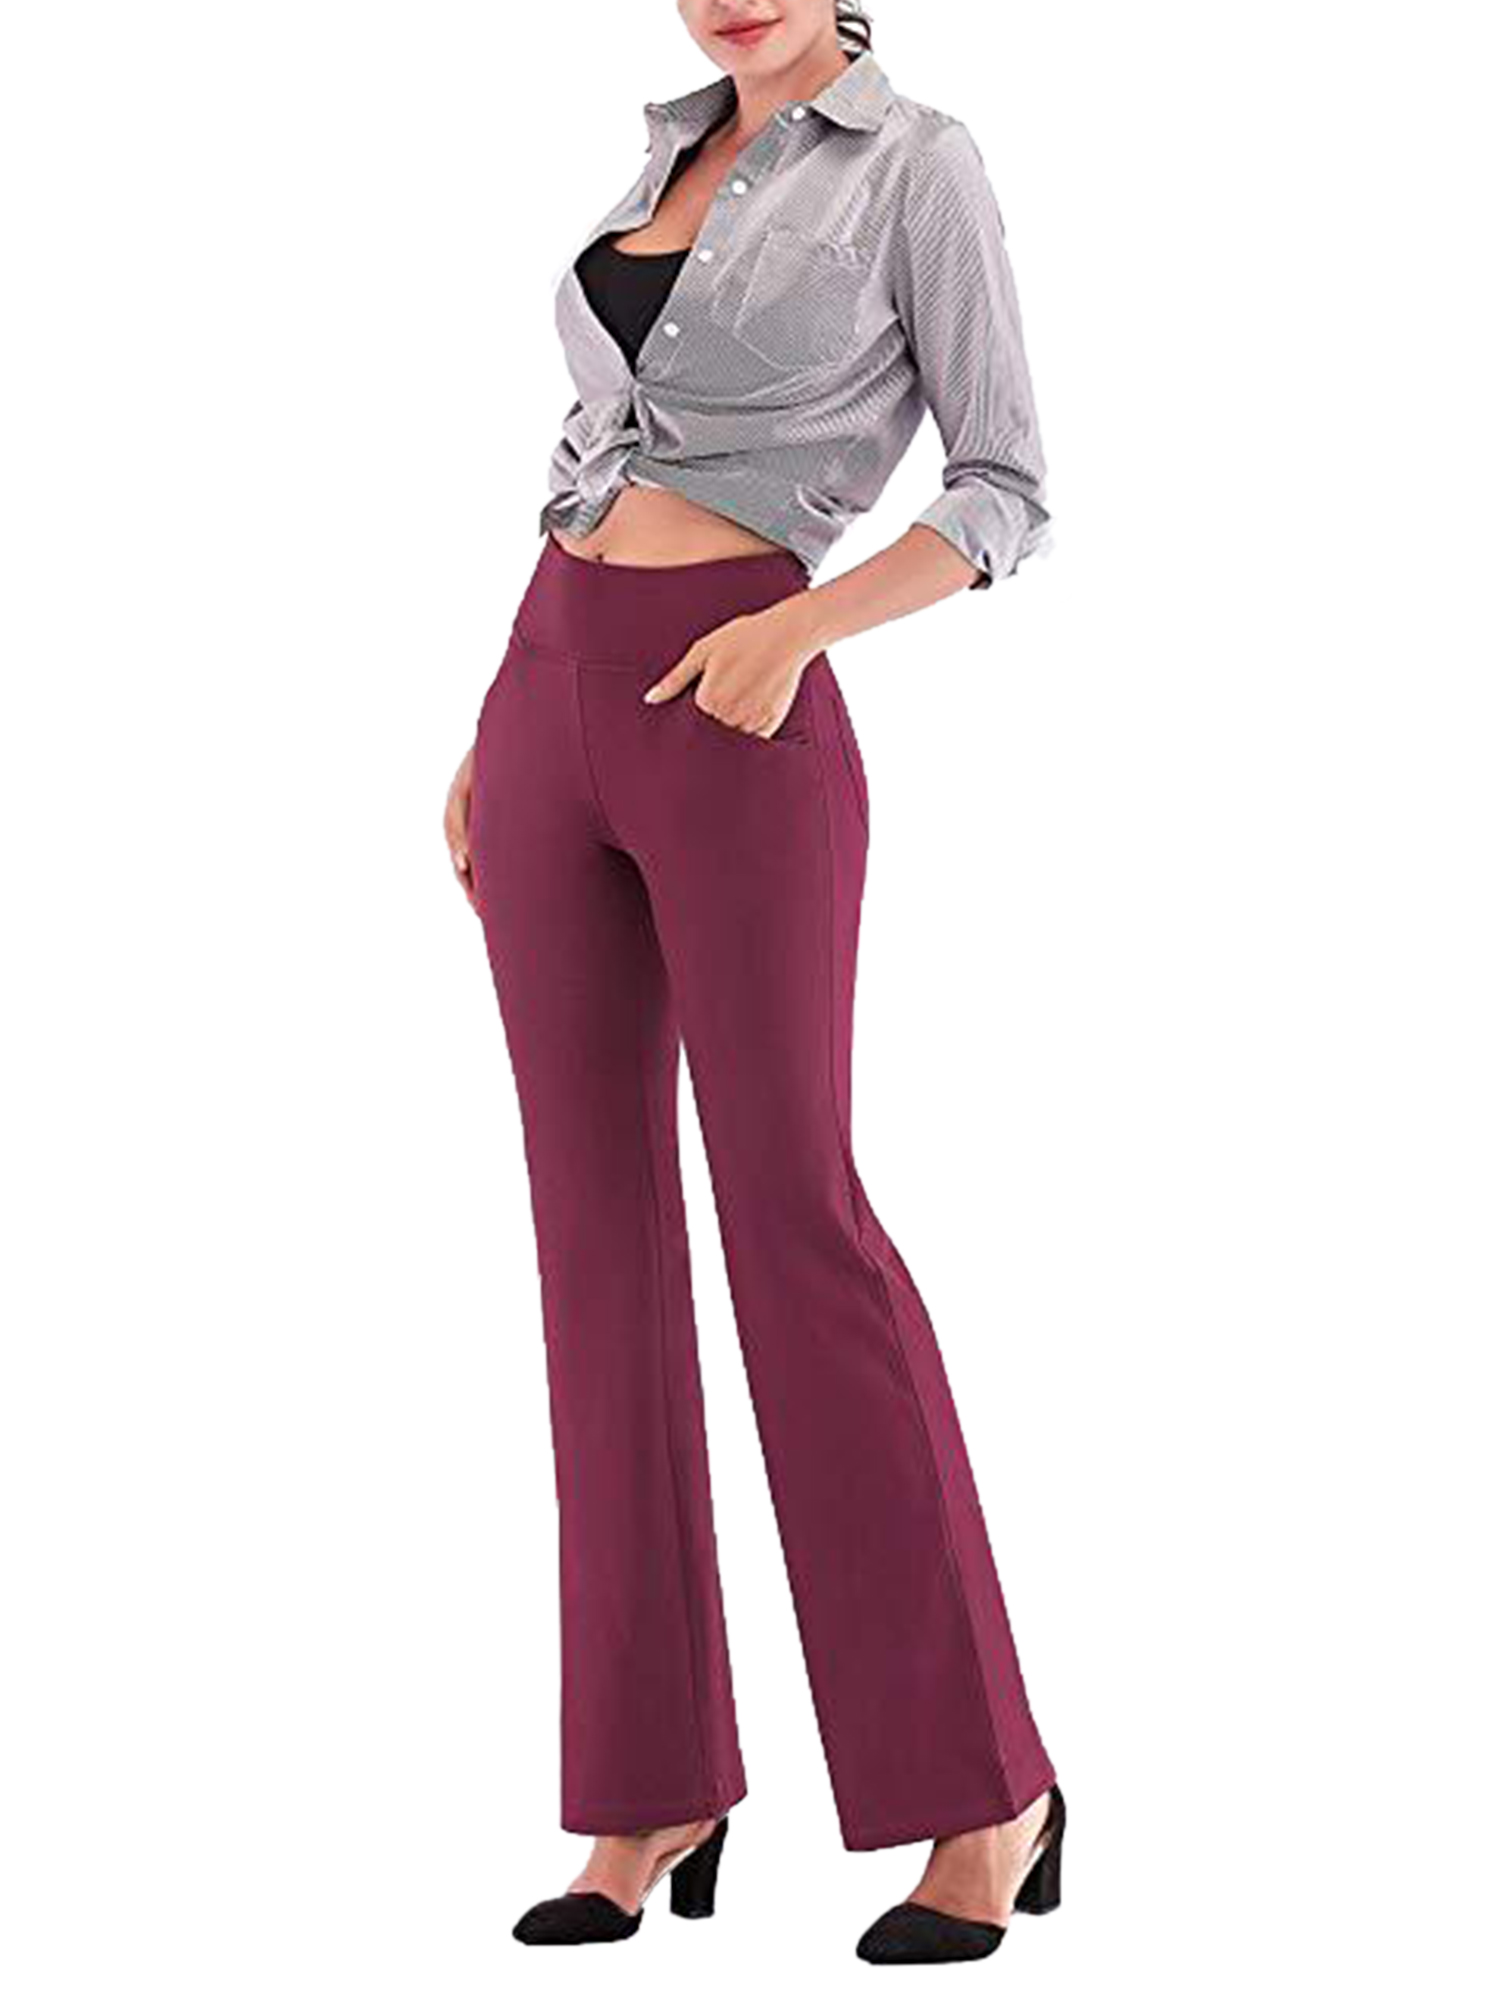 Bootcut Workout Leggings Pants with Pocket Women Ladies Casual Flare Dress Pants Plus Size High Waist Stretch Excises Trousers Activewear - image 4 of 6